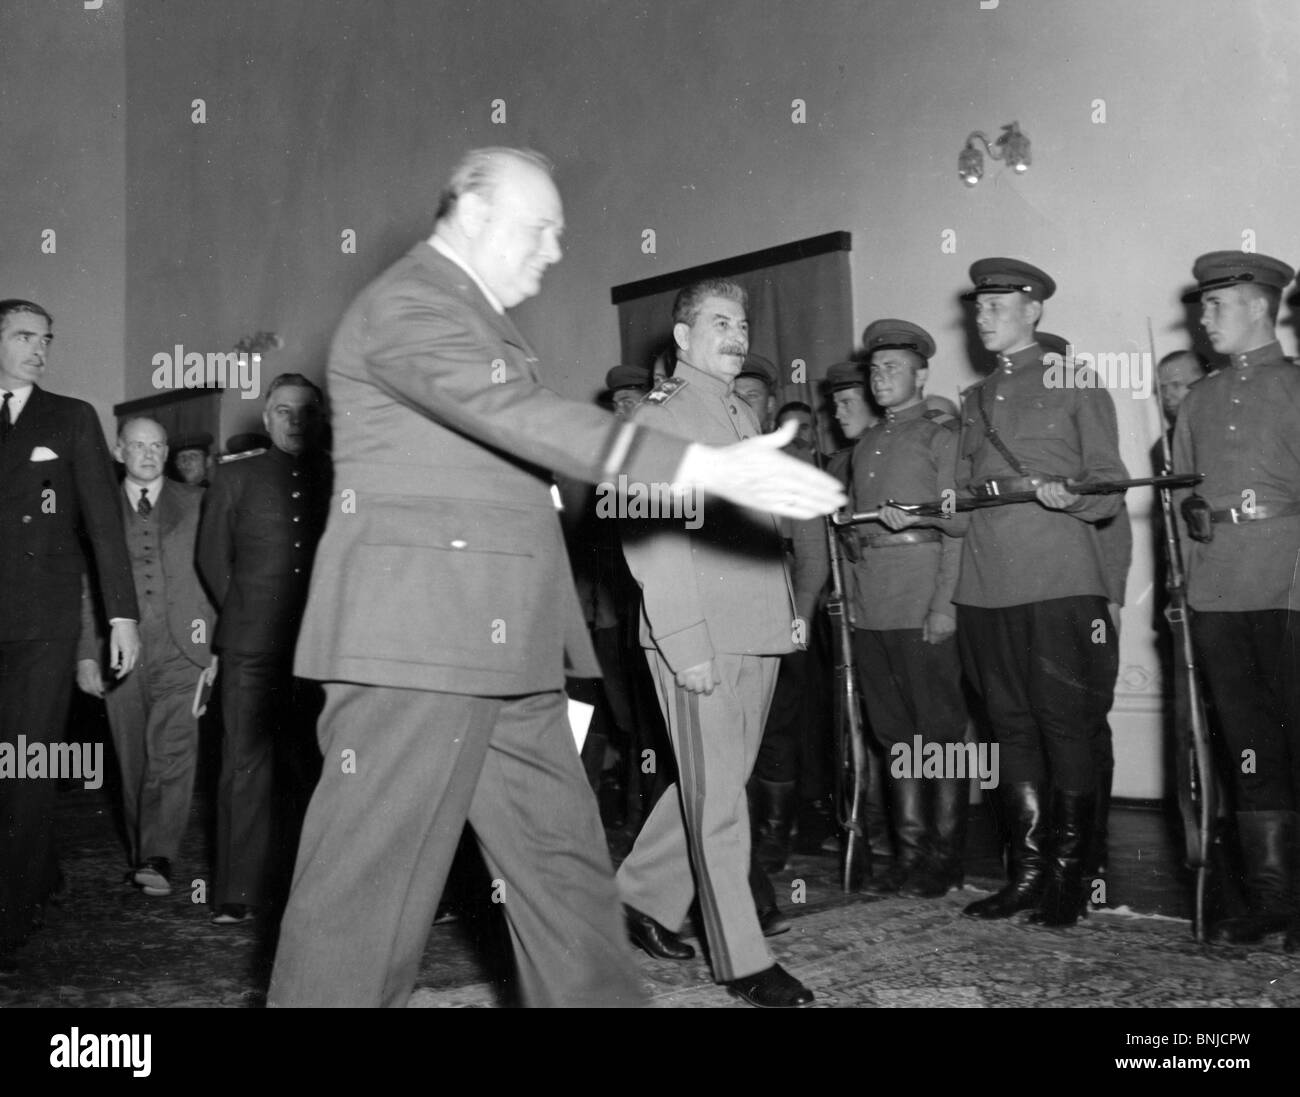 WINSTON CHURCHILL and Stalin at presentation of  Stalingrad Sword during  Tehran Conference, 29 November 1943. Photo Lewis Gale Stock Photo